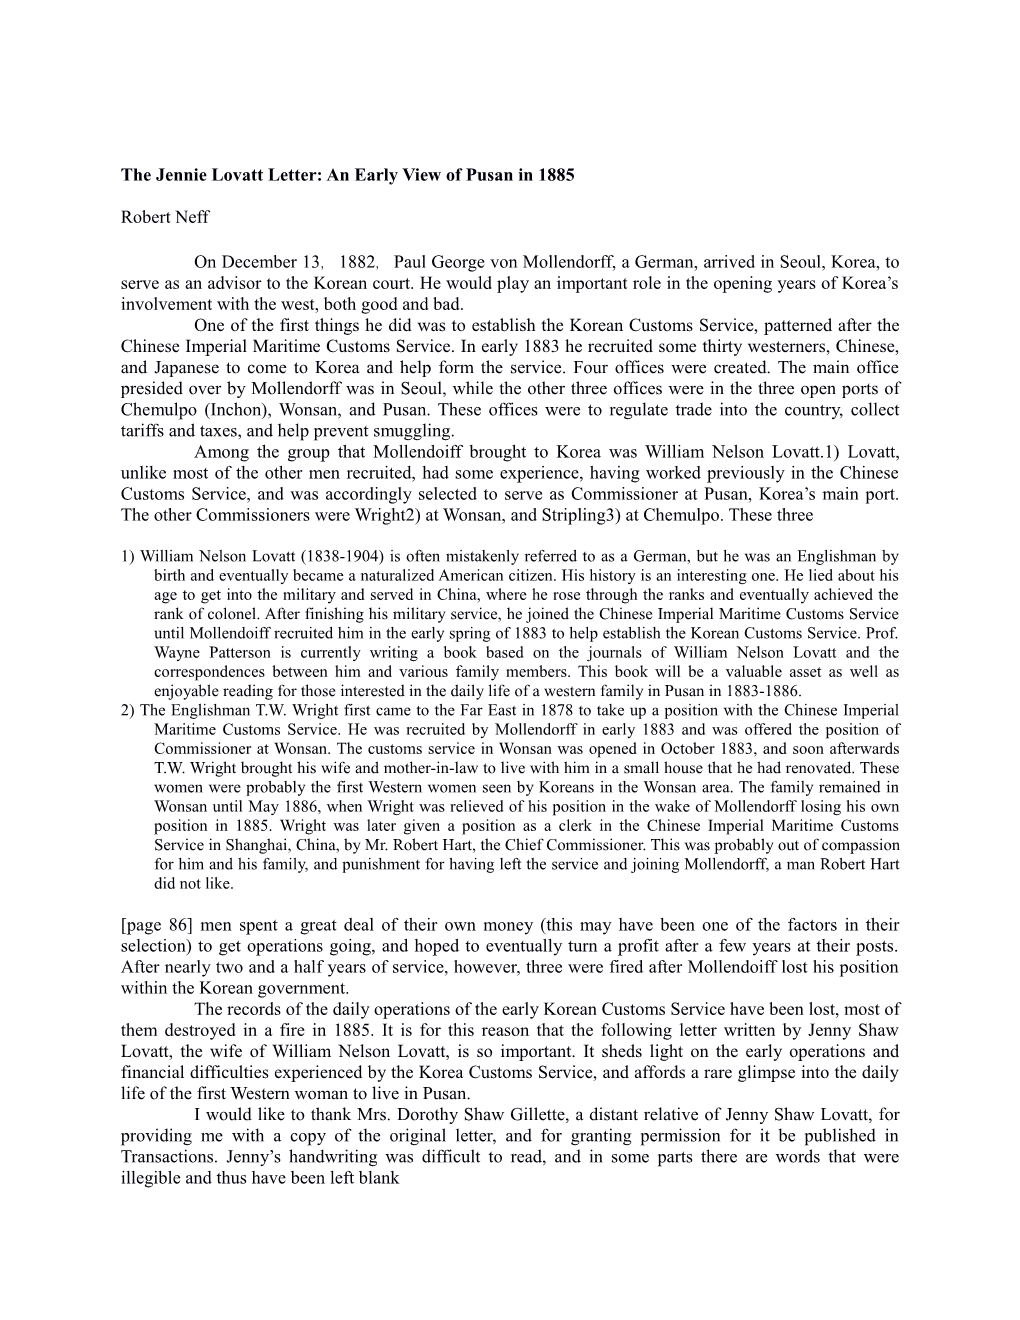 The Jennie Lovatt Letter: an Early View of Pusan in 1885